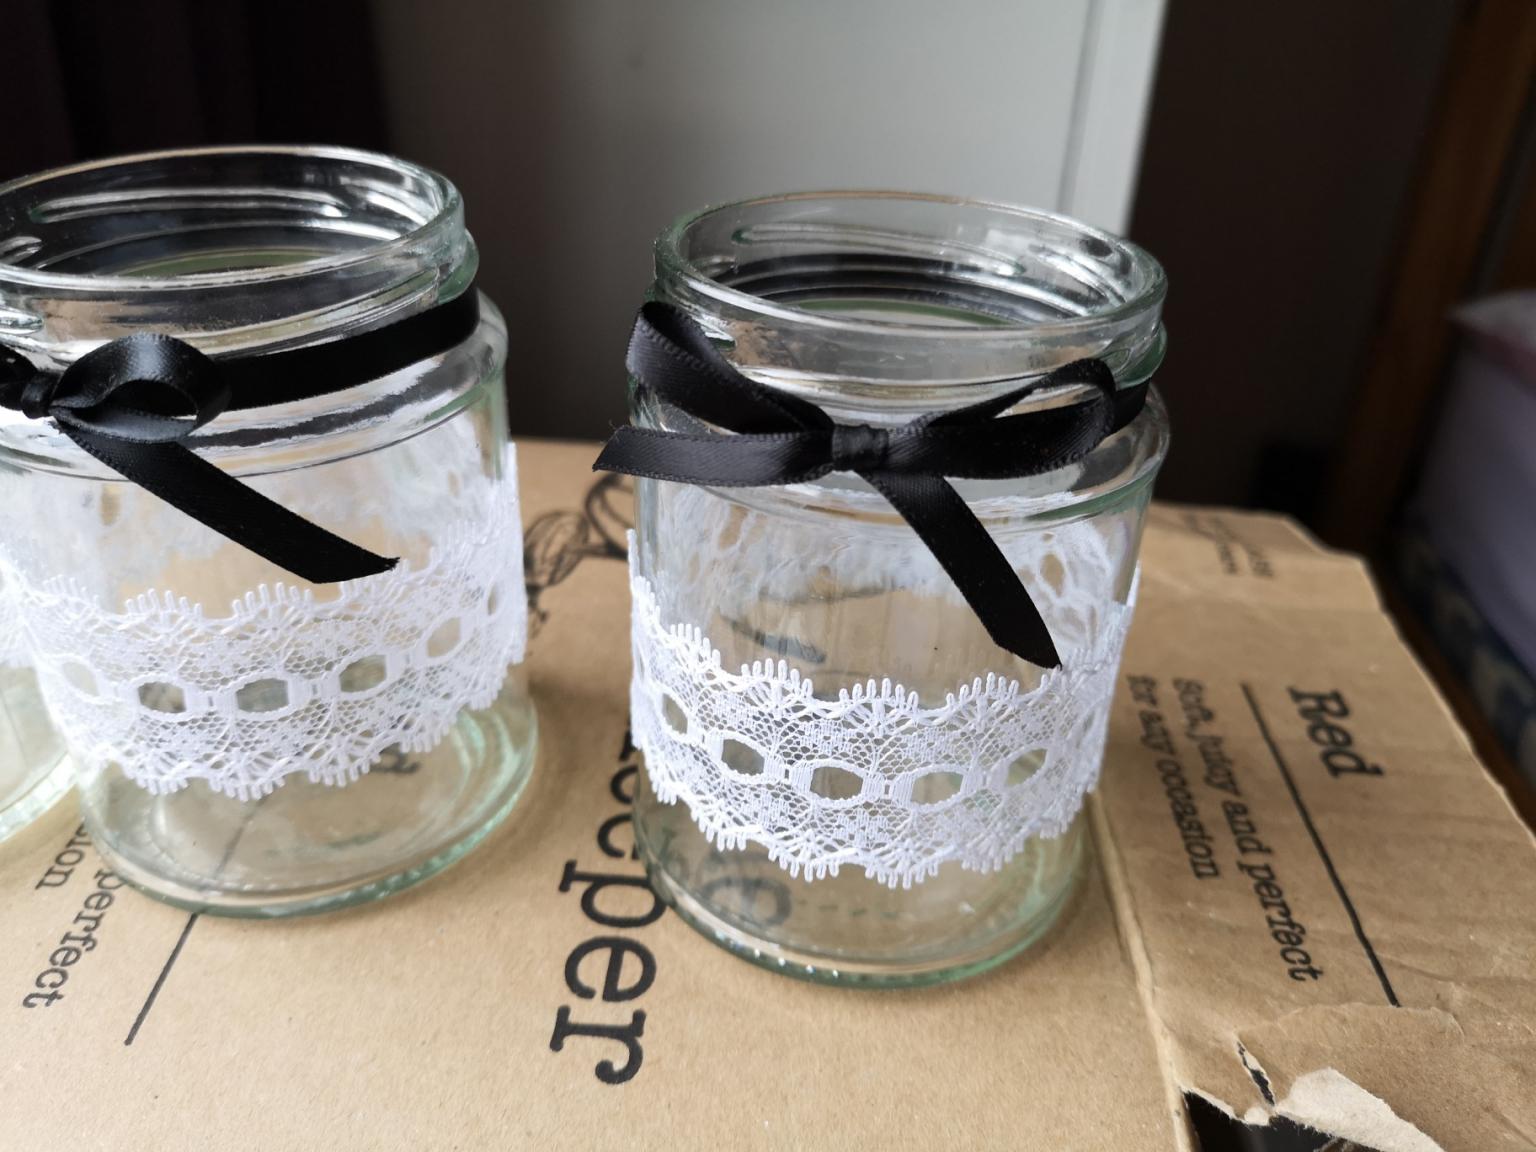 Decorated Jars X 24 In W7 London For 15 00 For Sale Shpock